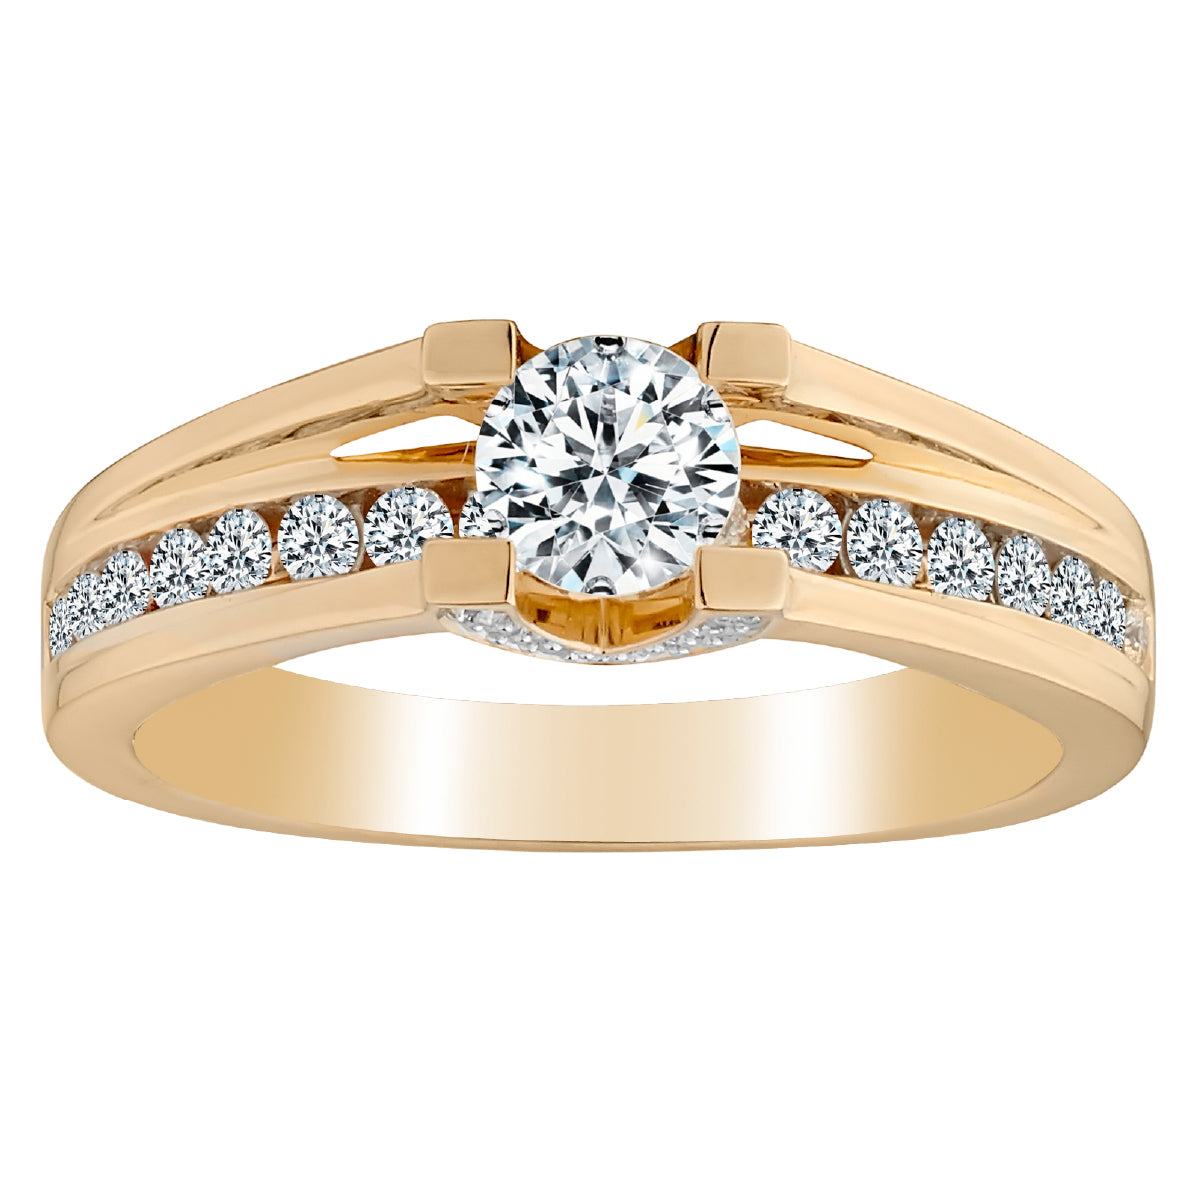 Latest Gold and Diamond Finger Ring Design For Her with Weight and